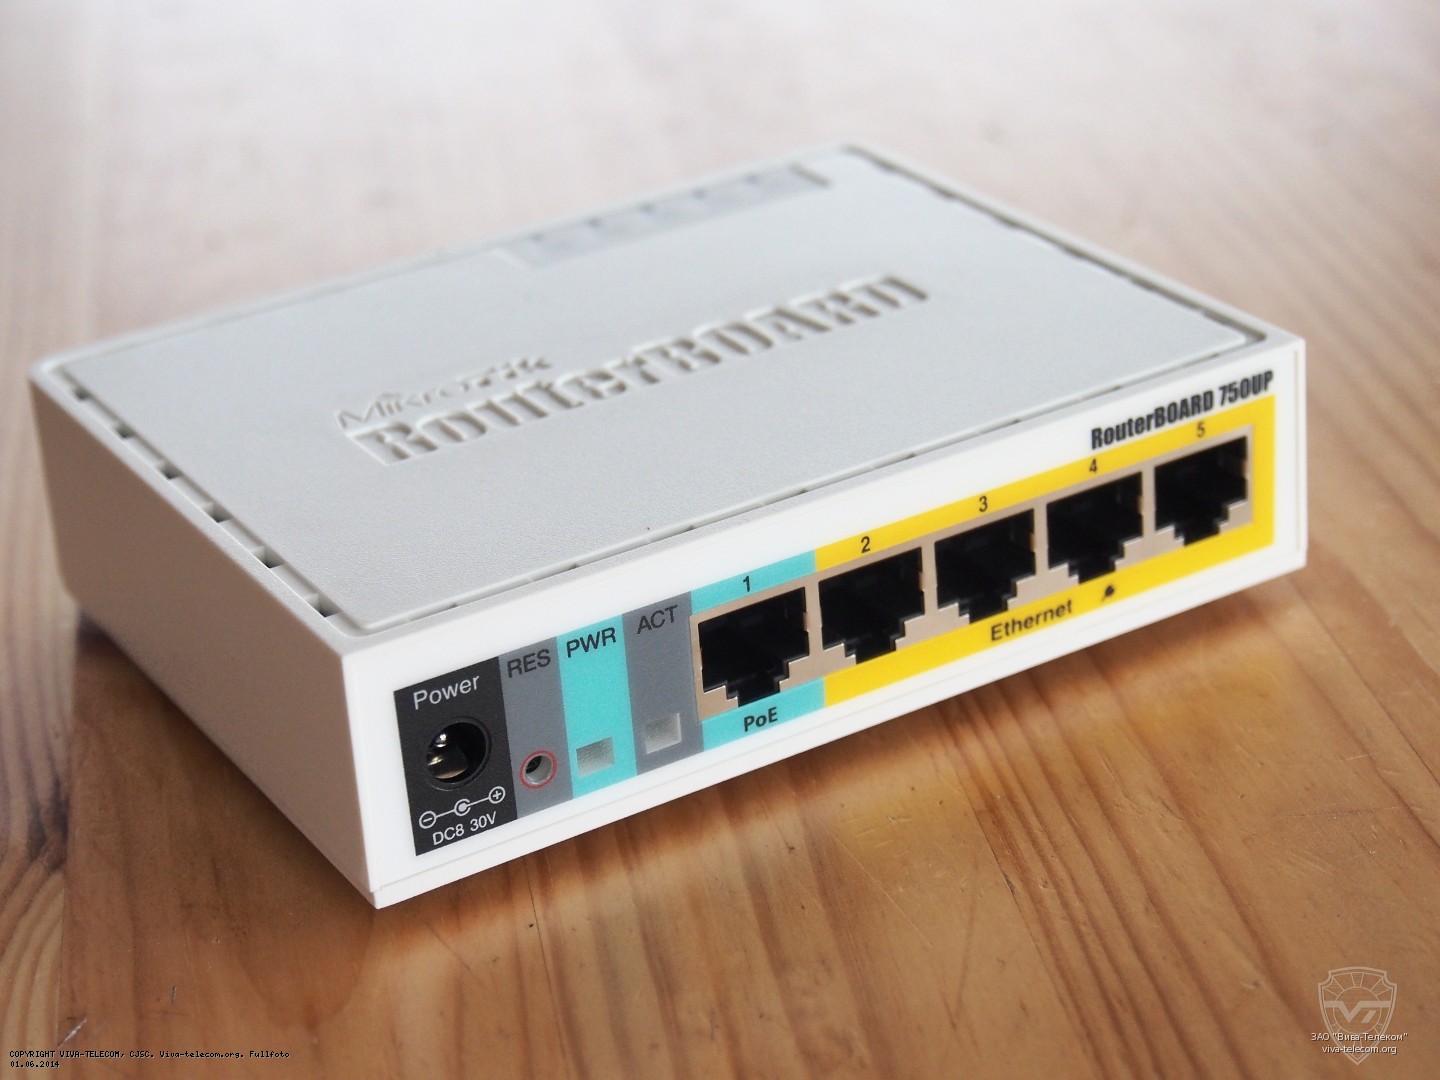    Mikrotik RouterBOARD 750UP 